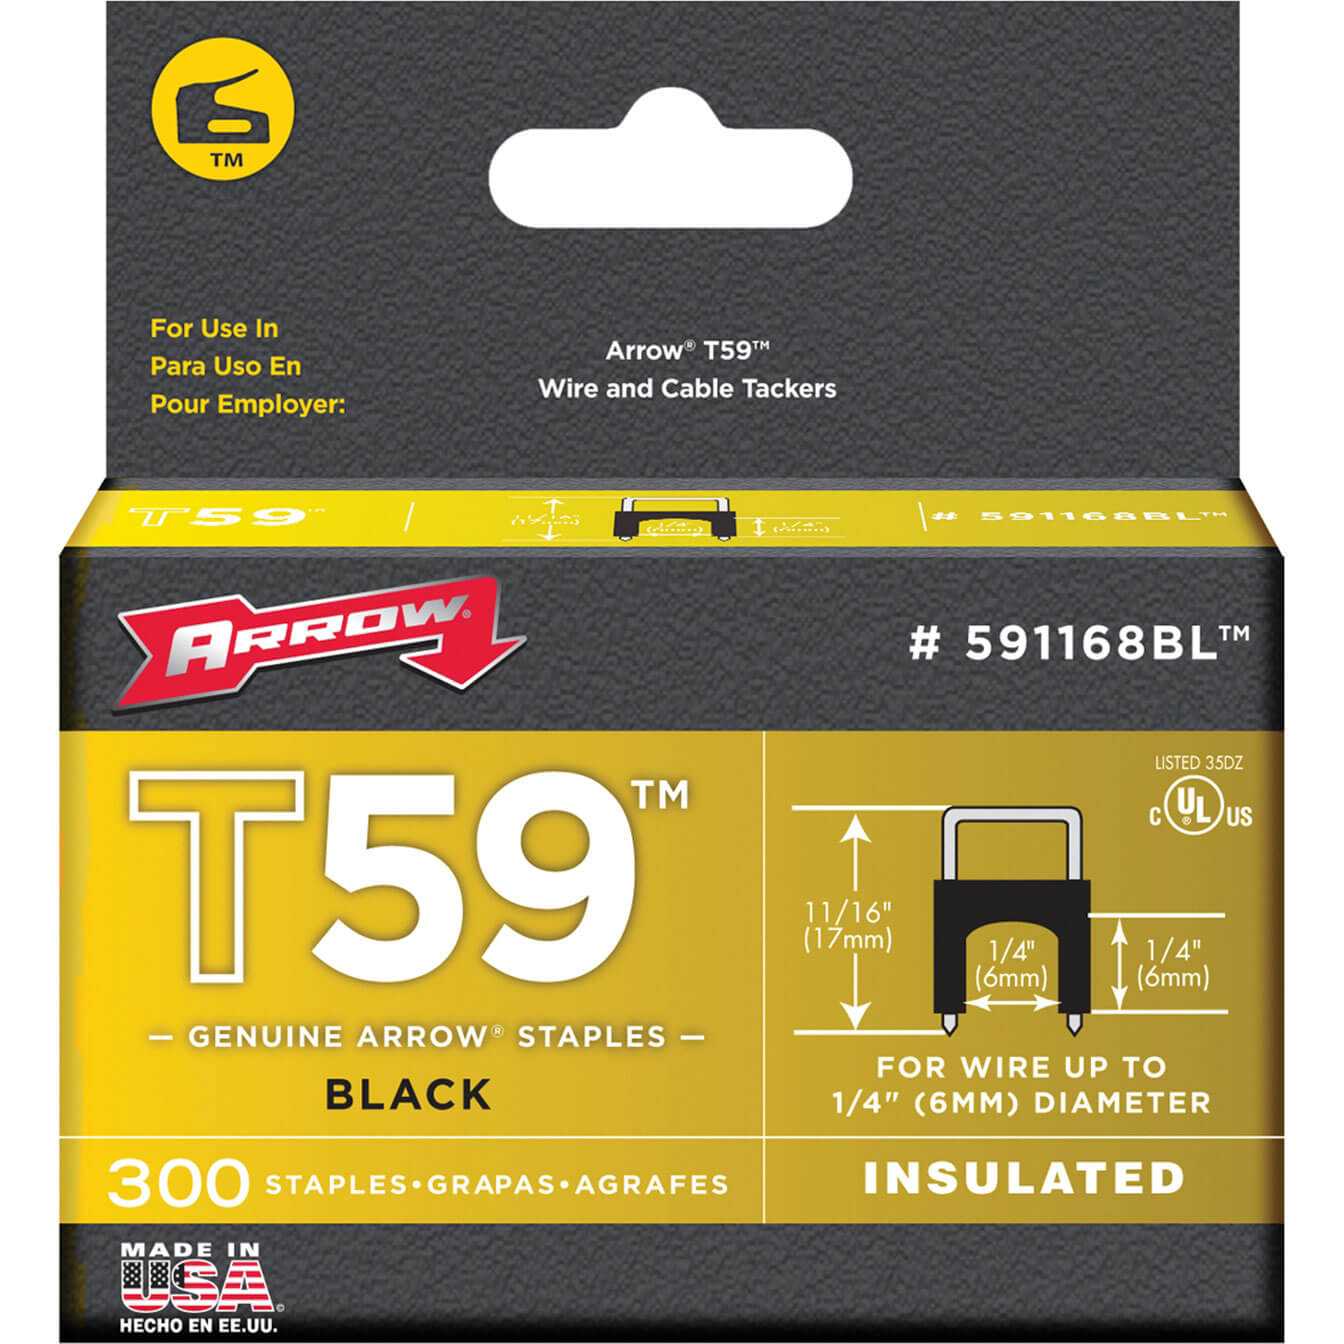 Photos - Staples Arrow T59 Insulated  6mm Black Pack of 300 